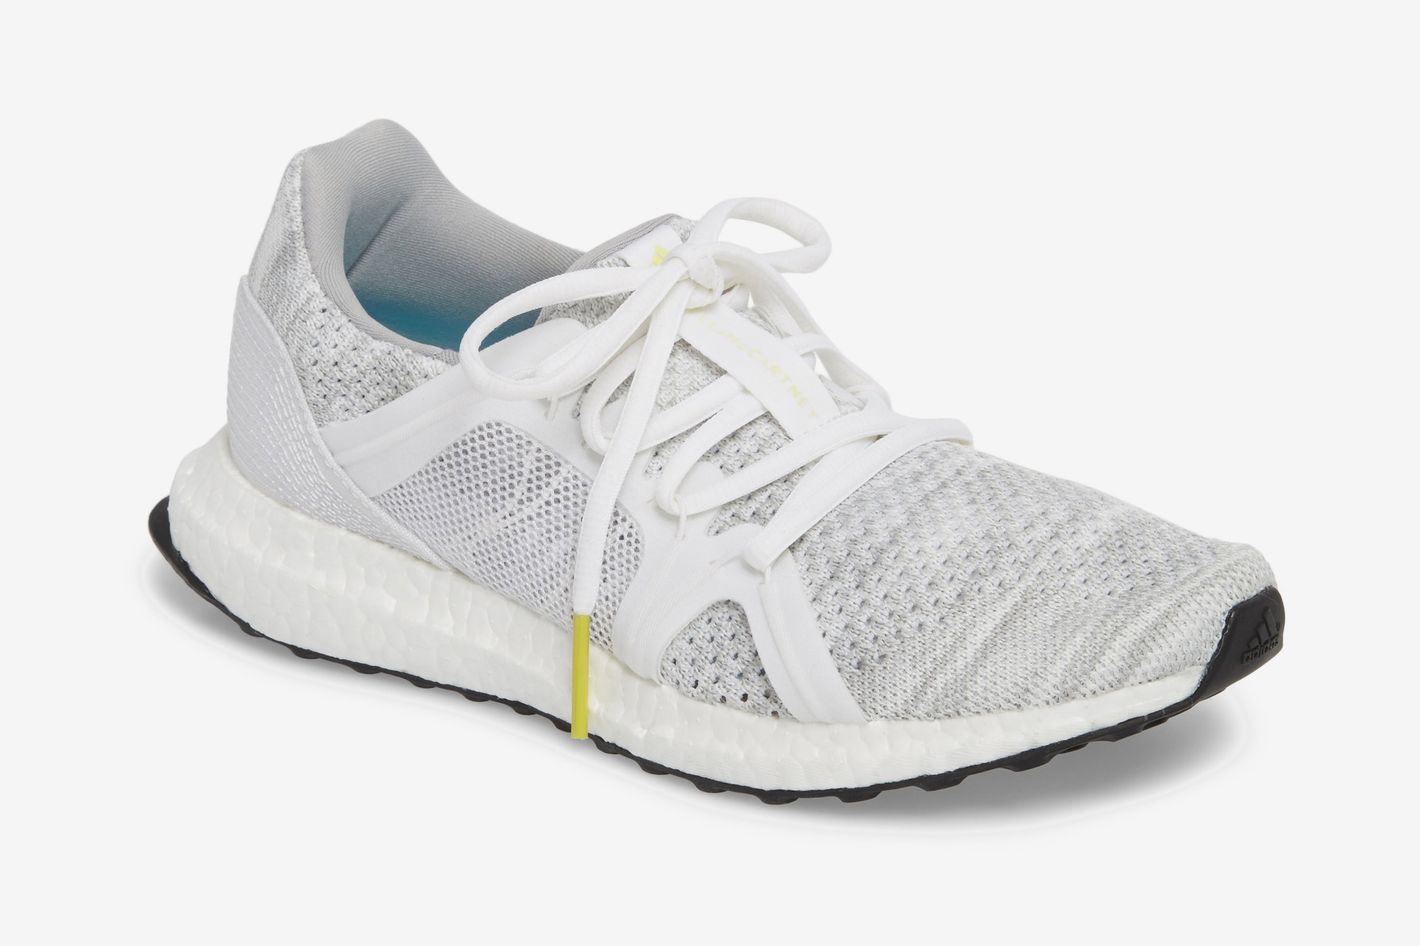 Adidas Ultraboost x Parley Running Shoes